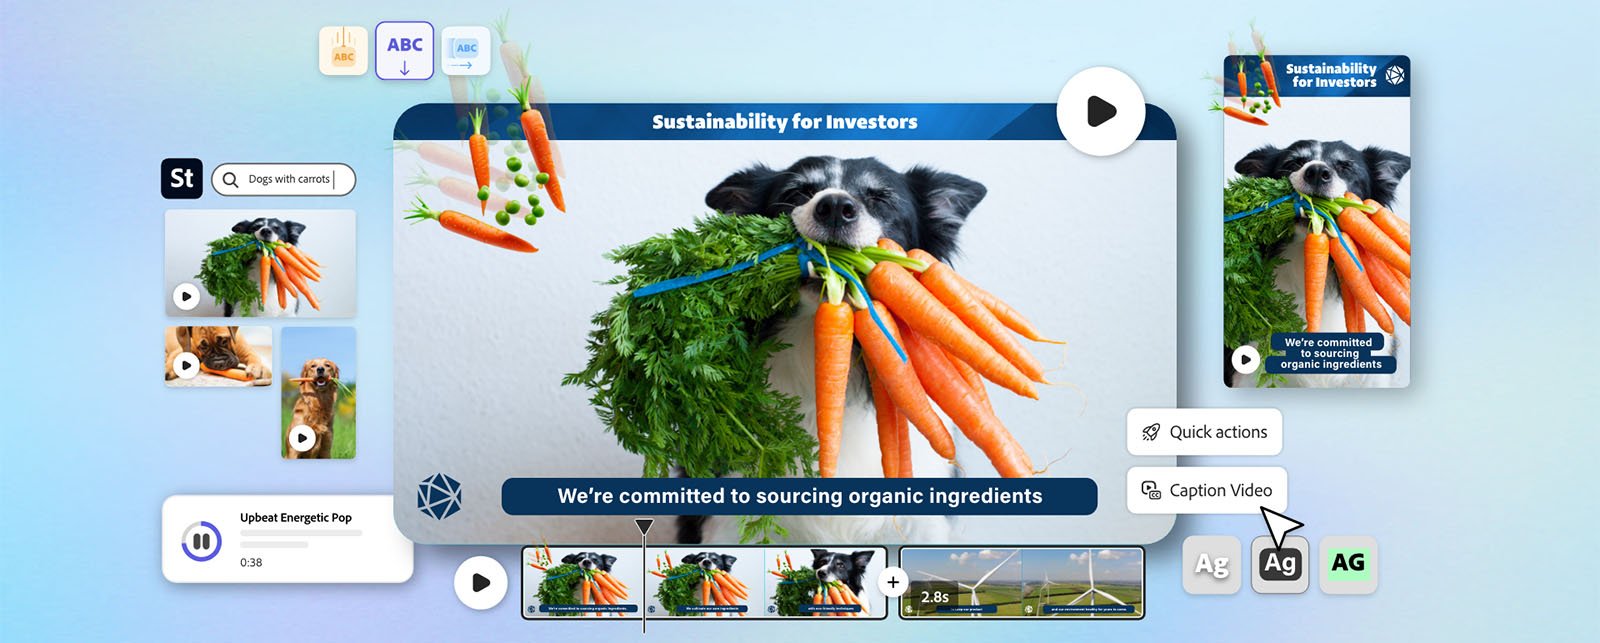 A digital marketing interface showcasing a black and white dog wearing a bunch of carrots around its neck. The text reads, "Sustainability for Investors" and "We're committed to sourcing organic ingredients." Various editing tools and media options are displayed around the image.